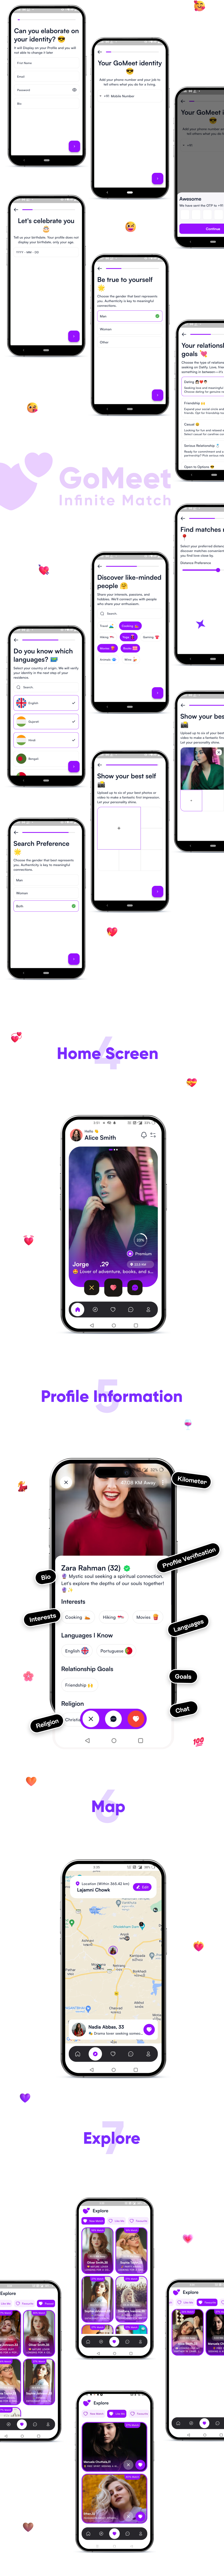 GoMeet - Complete Social Dating Mobile App | Online Dating | Match, Chat & Video Dating | Dating App - 2